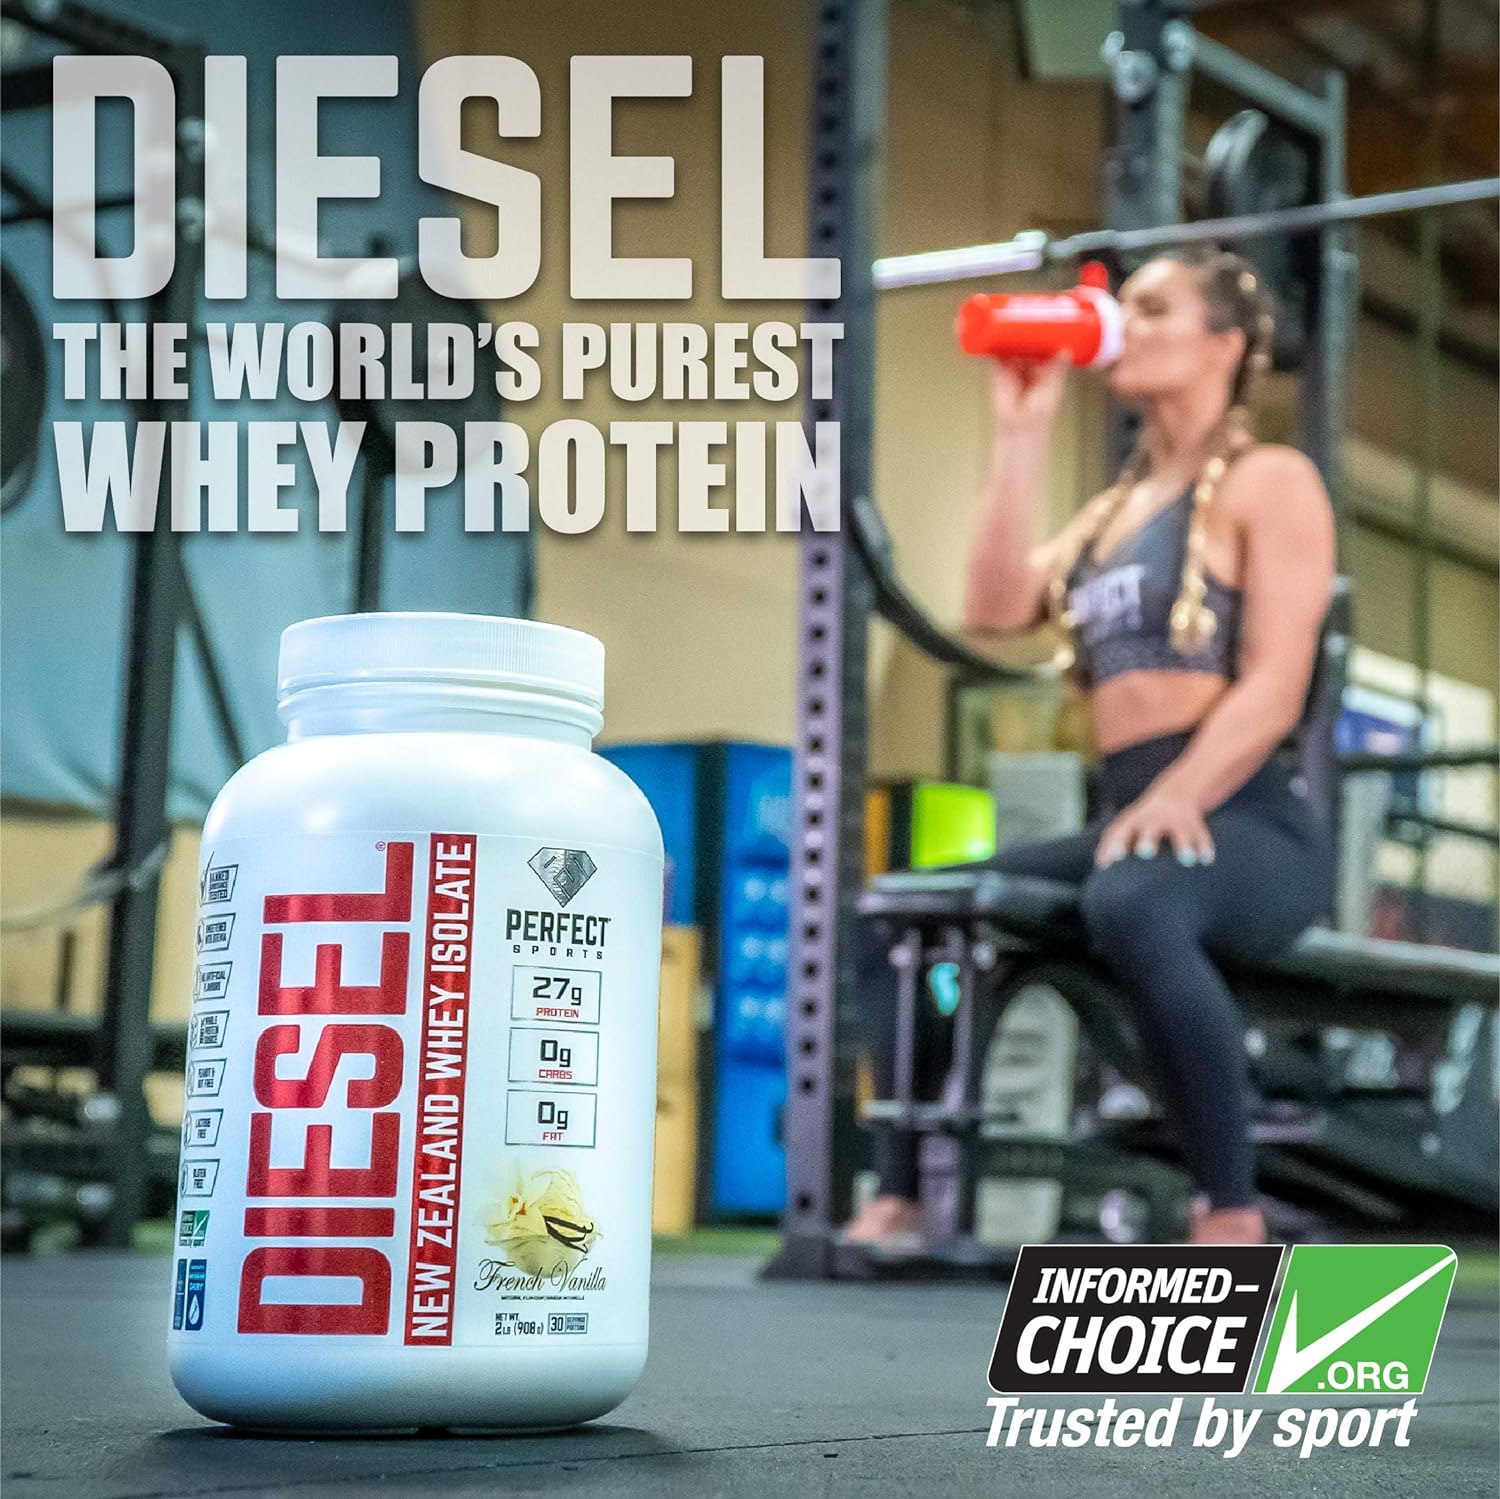 PERFECT Sports, Diesel 100% New Zealand Whey Isolate, Grass-Fed & Past